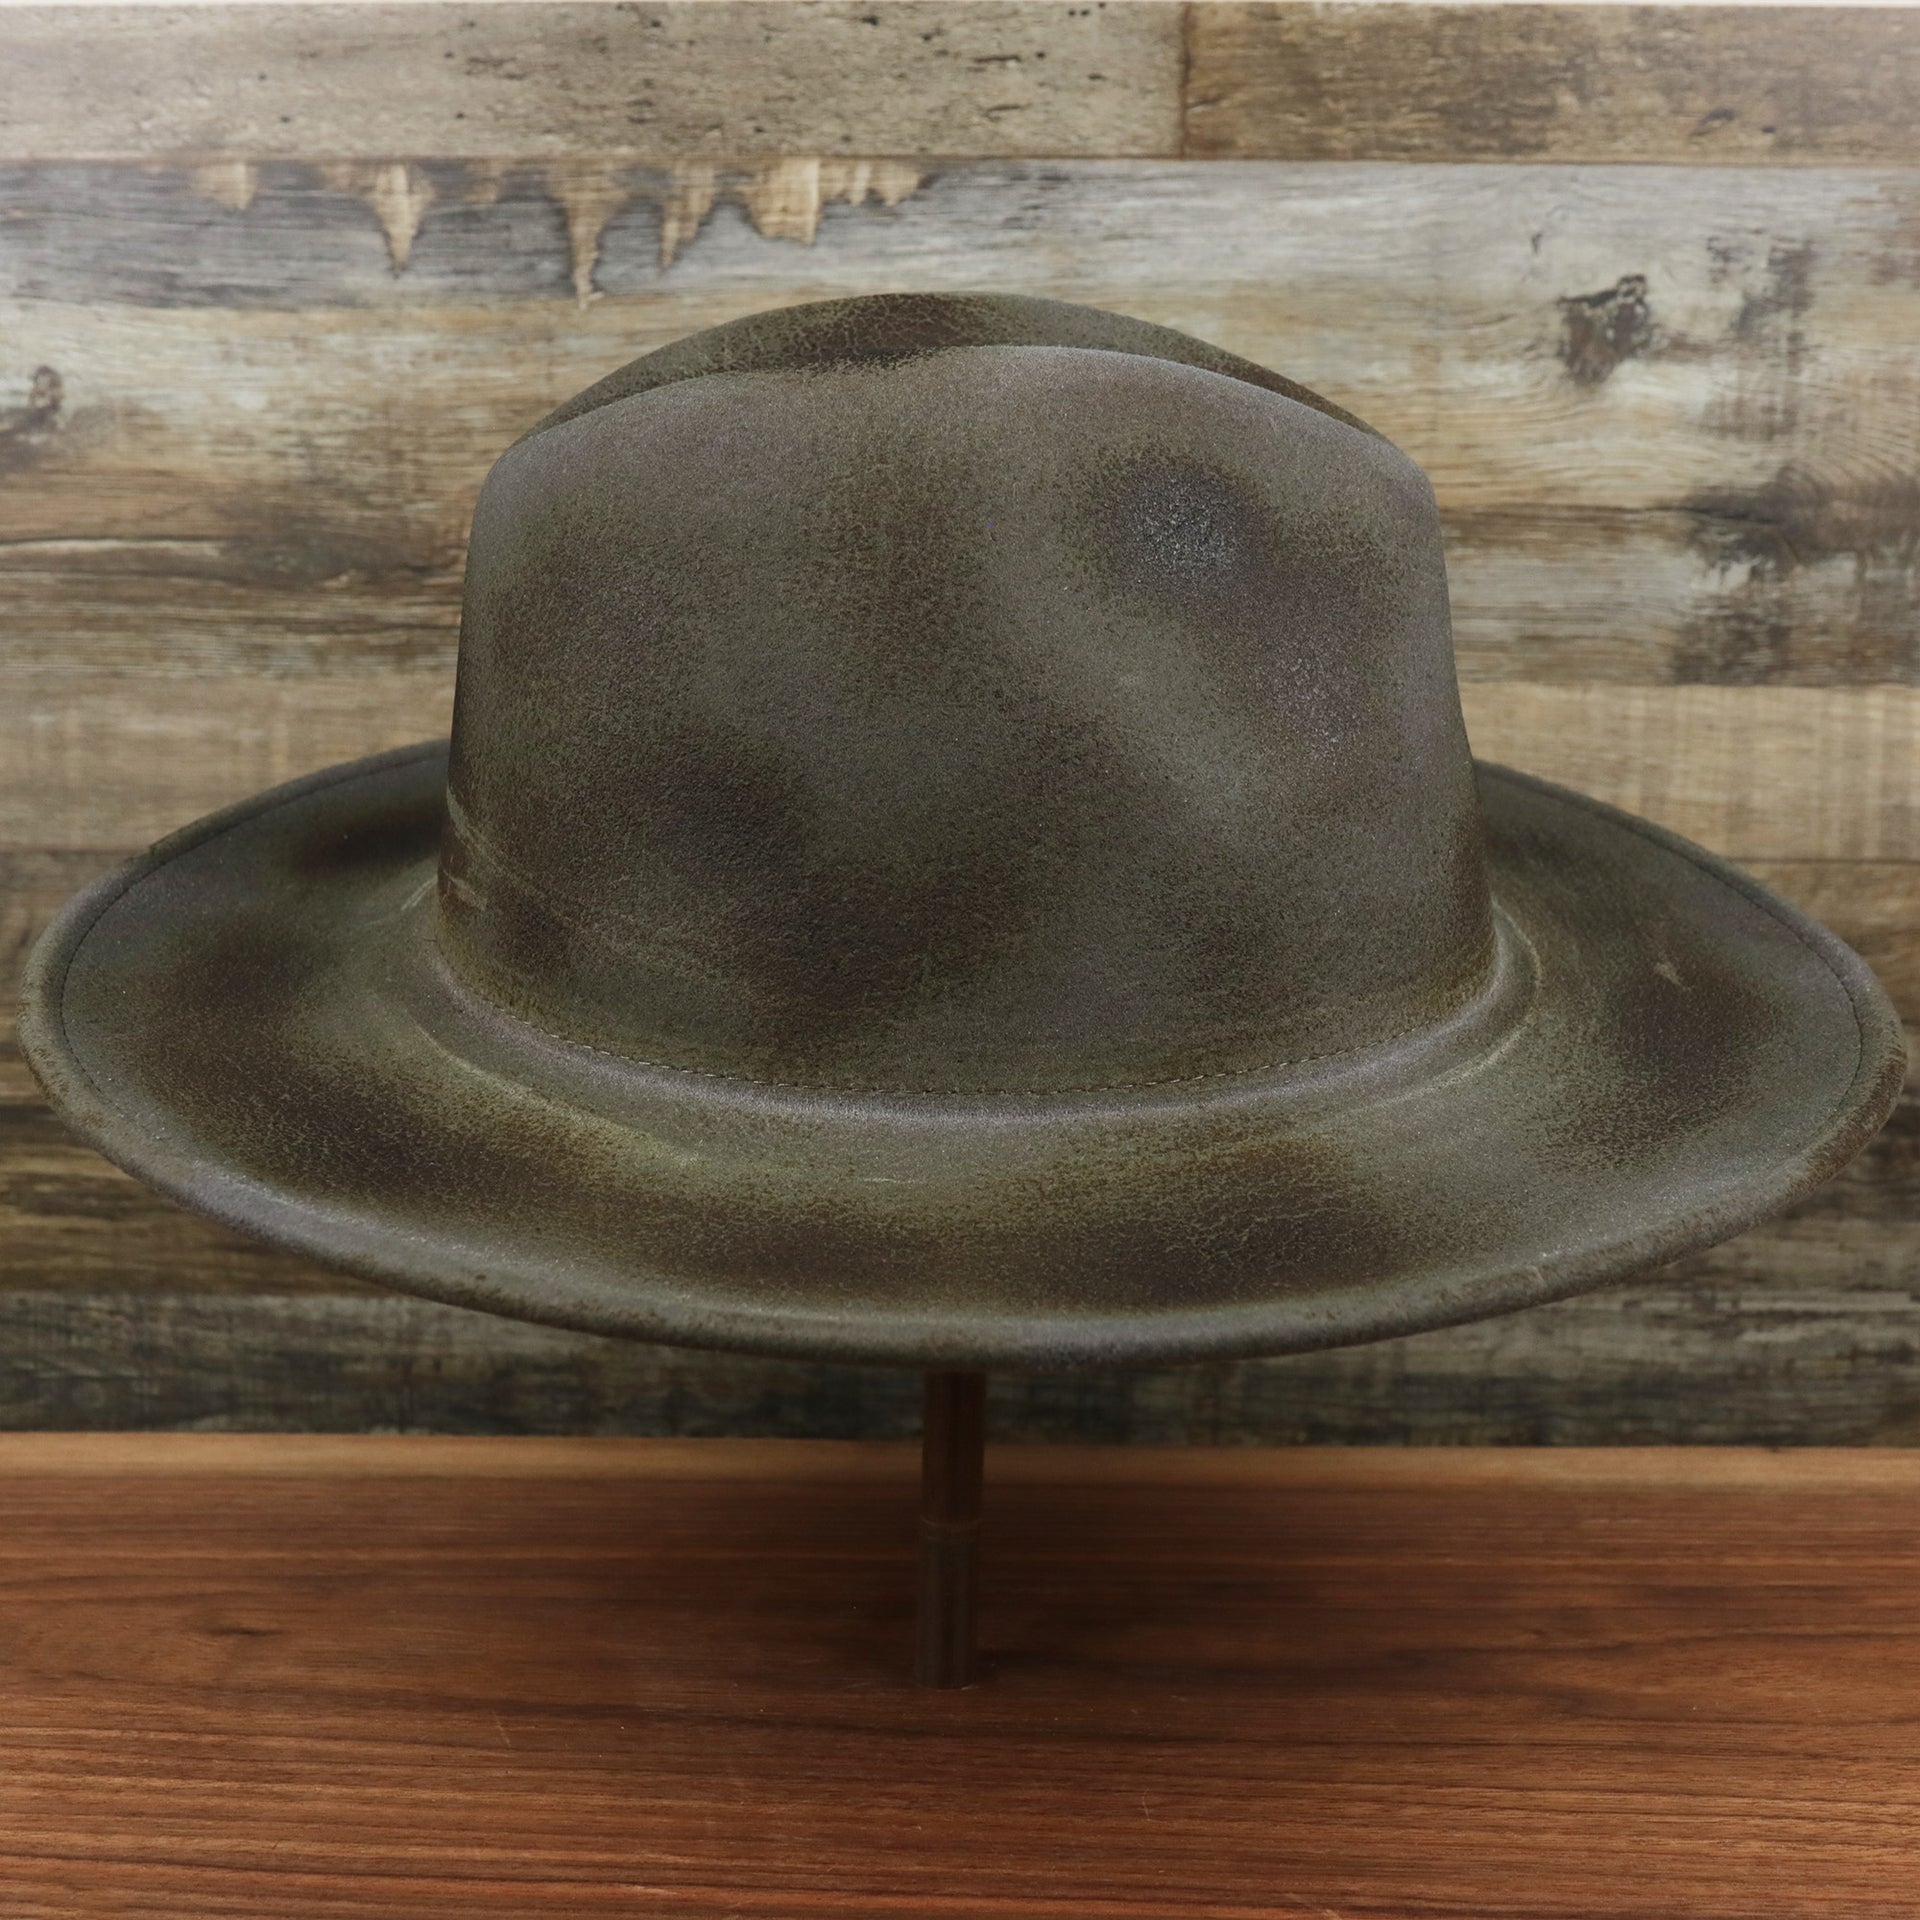 The Wide Brim Ribbon Edge Chared Fedora Hat with Brown Paisley Silk Interior | Zertrue 100% Australian Woo from the side